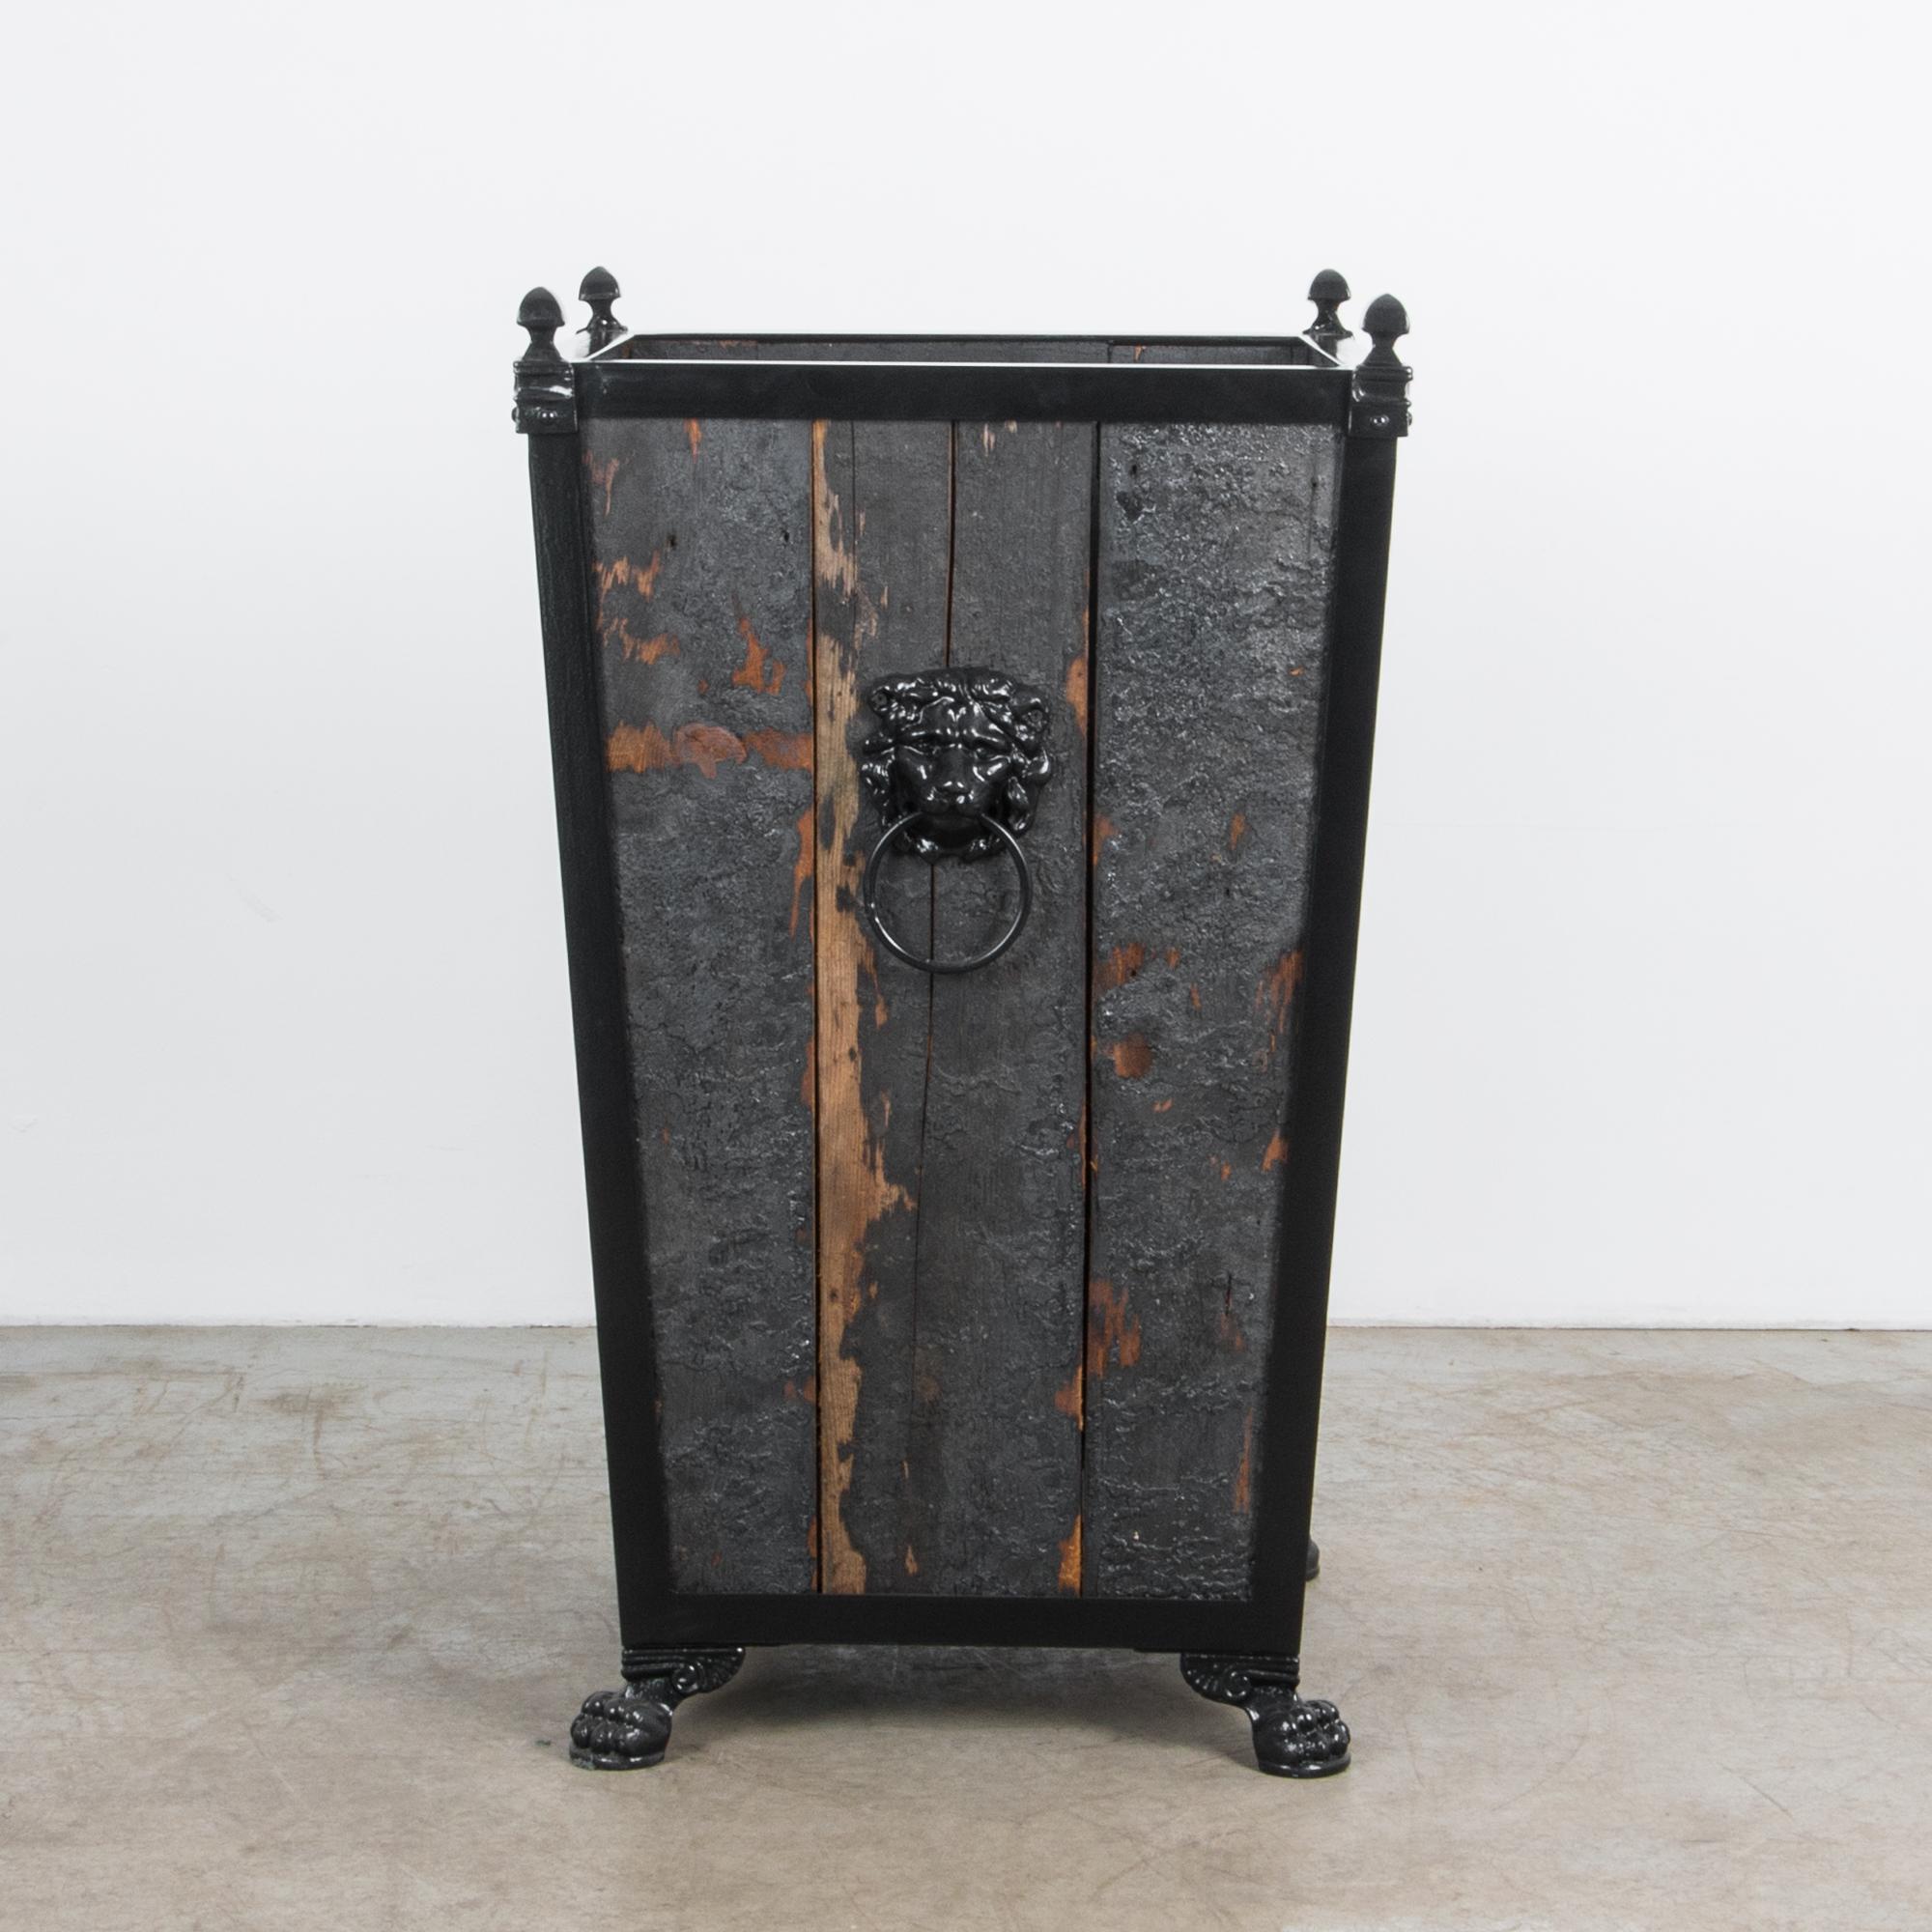 A sturdy wooden garden planter produced in our atelier. Finished with dramatic black tar, this wooden planter combines aged pine and sleek painted metal for an atmospheric texture. The textured finish compliments a Classic combination of metal and